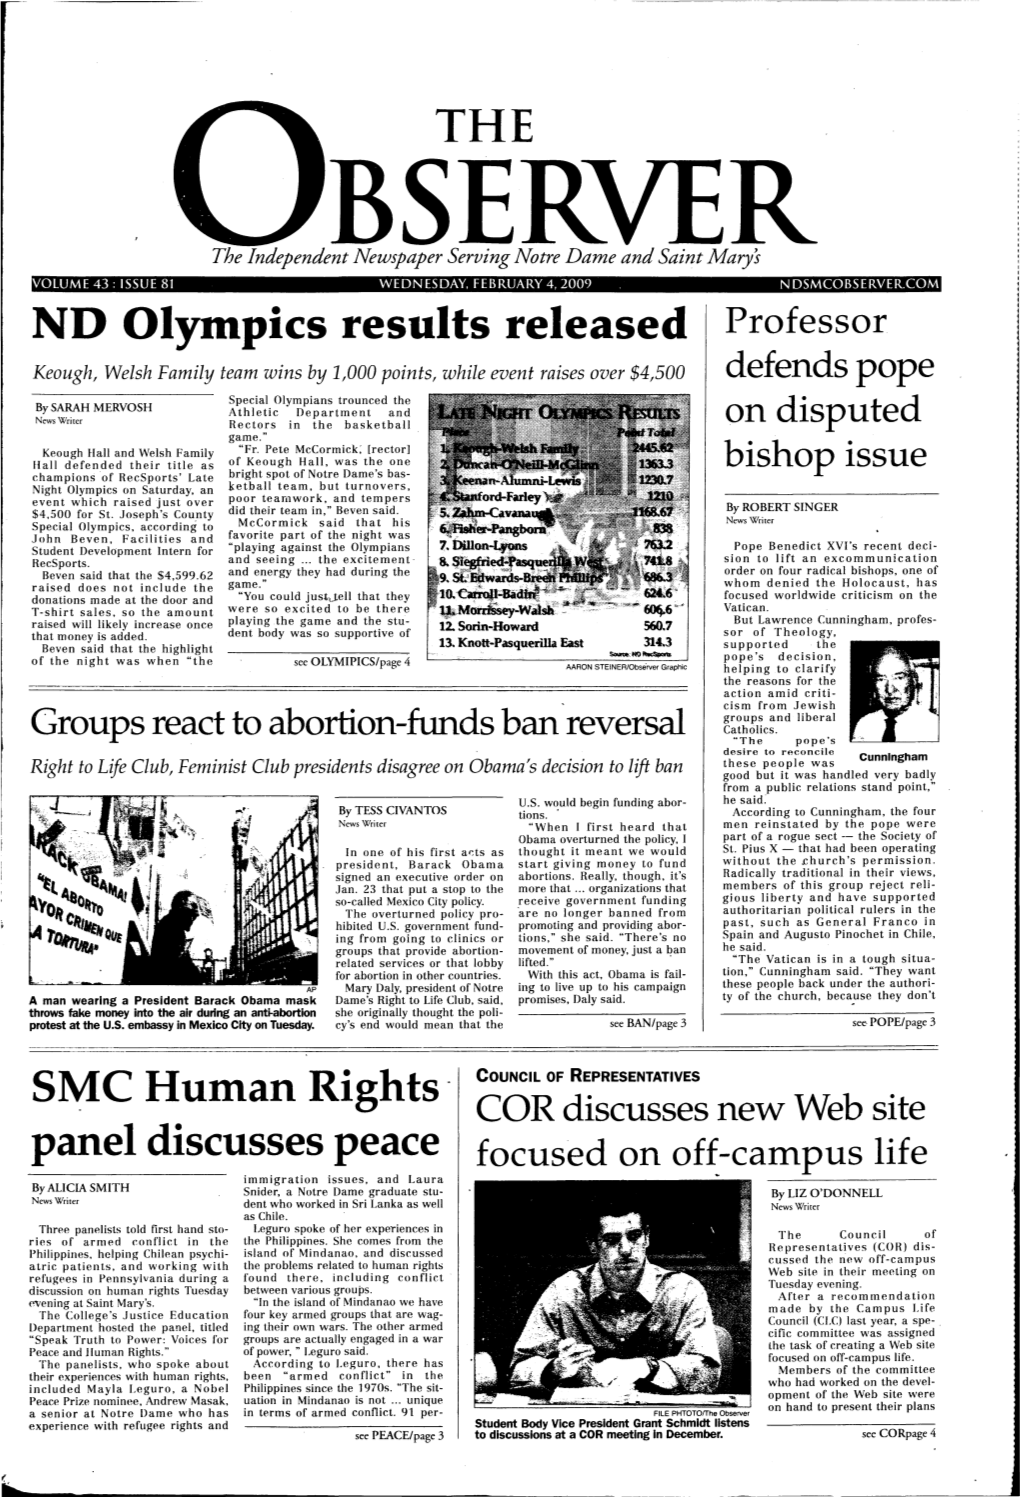 ND Olympics Results Released